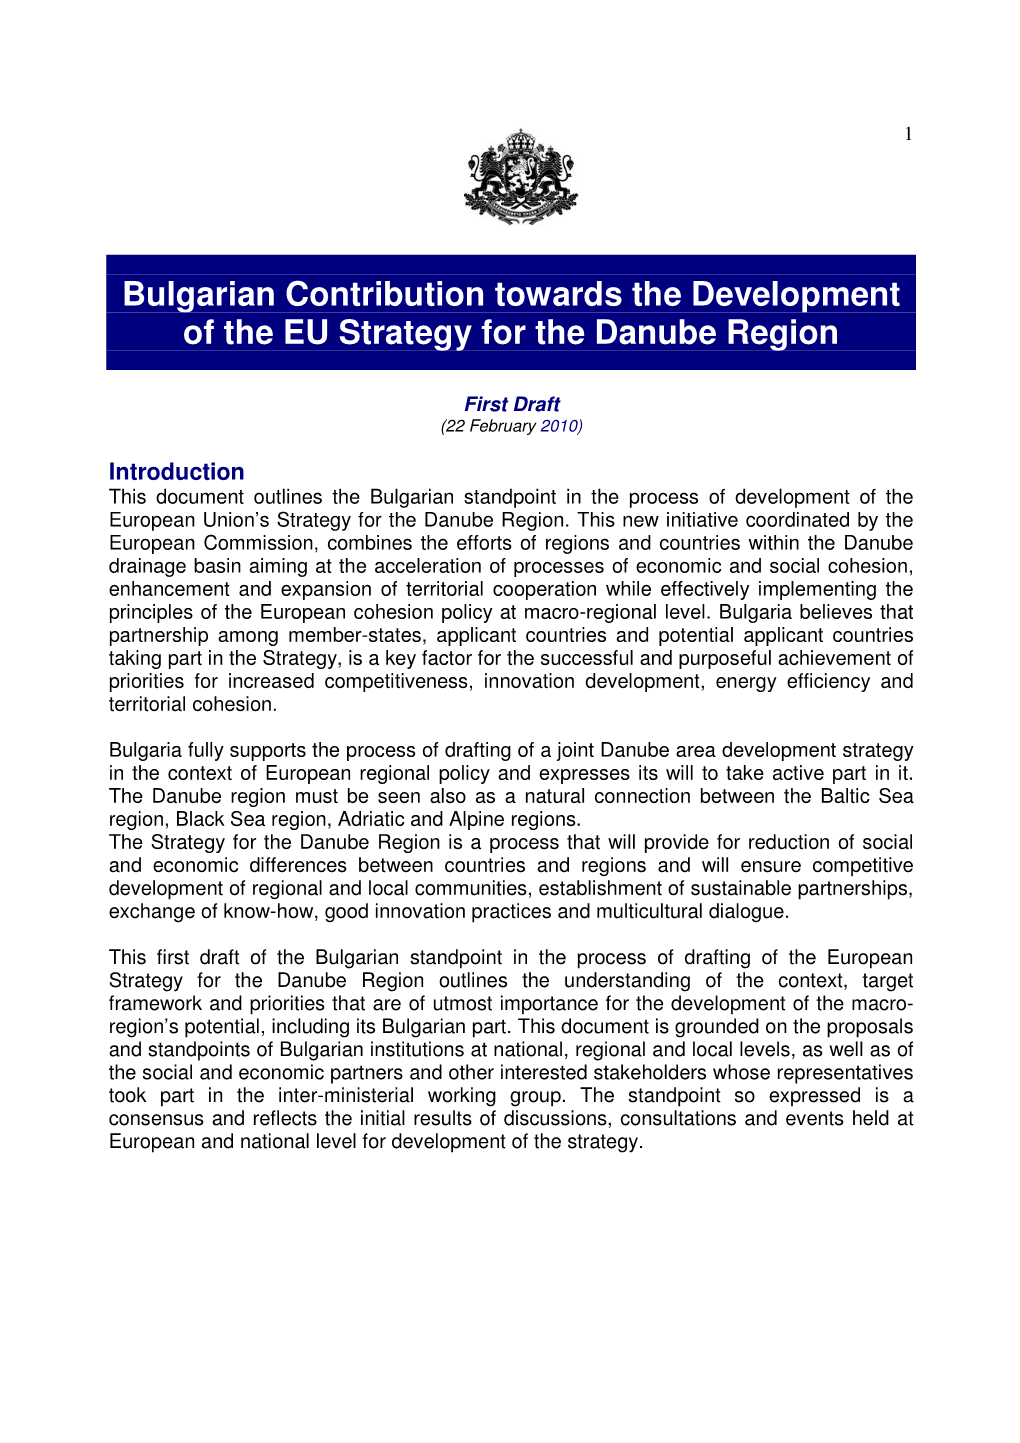 Bulgarian Contribution Towards the Development of the EU Strategy for the Danube Region